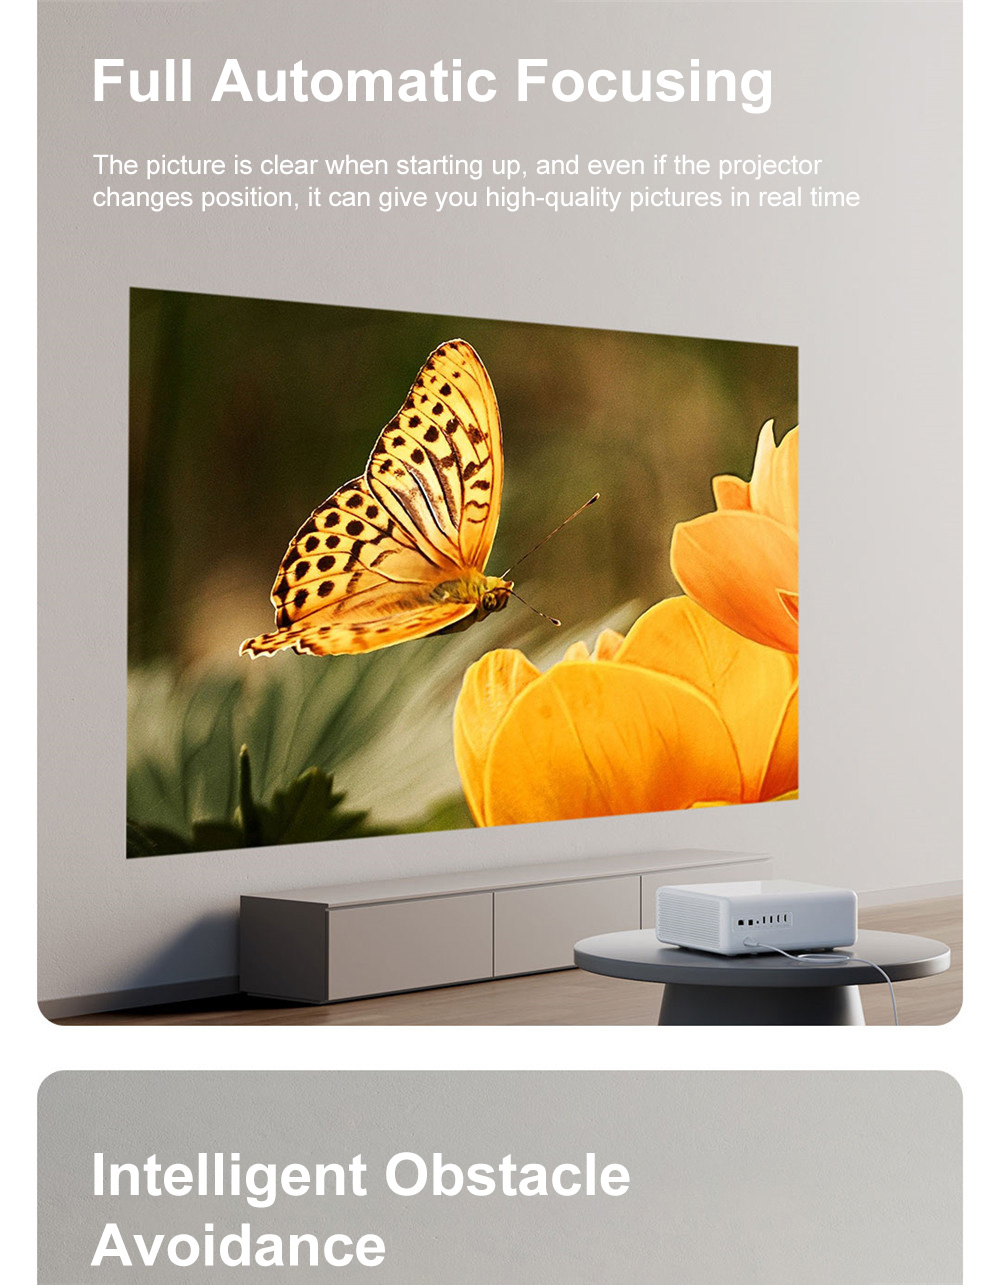 Xiaomi-Iaser-projector-1S-ALPD-2400-ANSI-Lumens-4k-Resolution-Supported-250-Inch-Screen-Wifi-BT50-ME-1963532-12